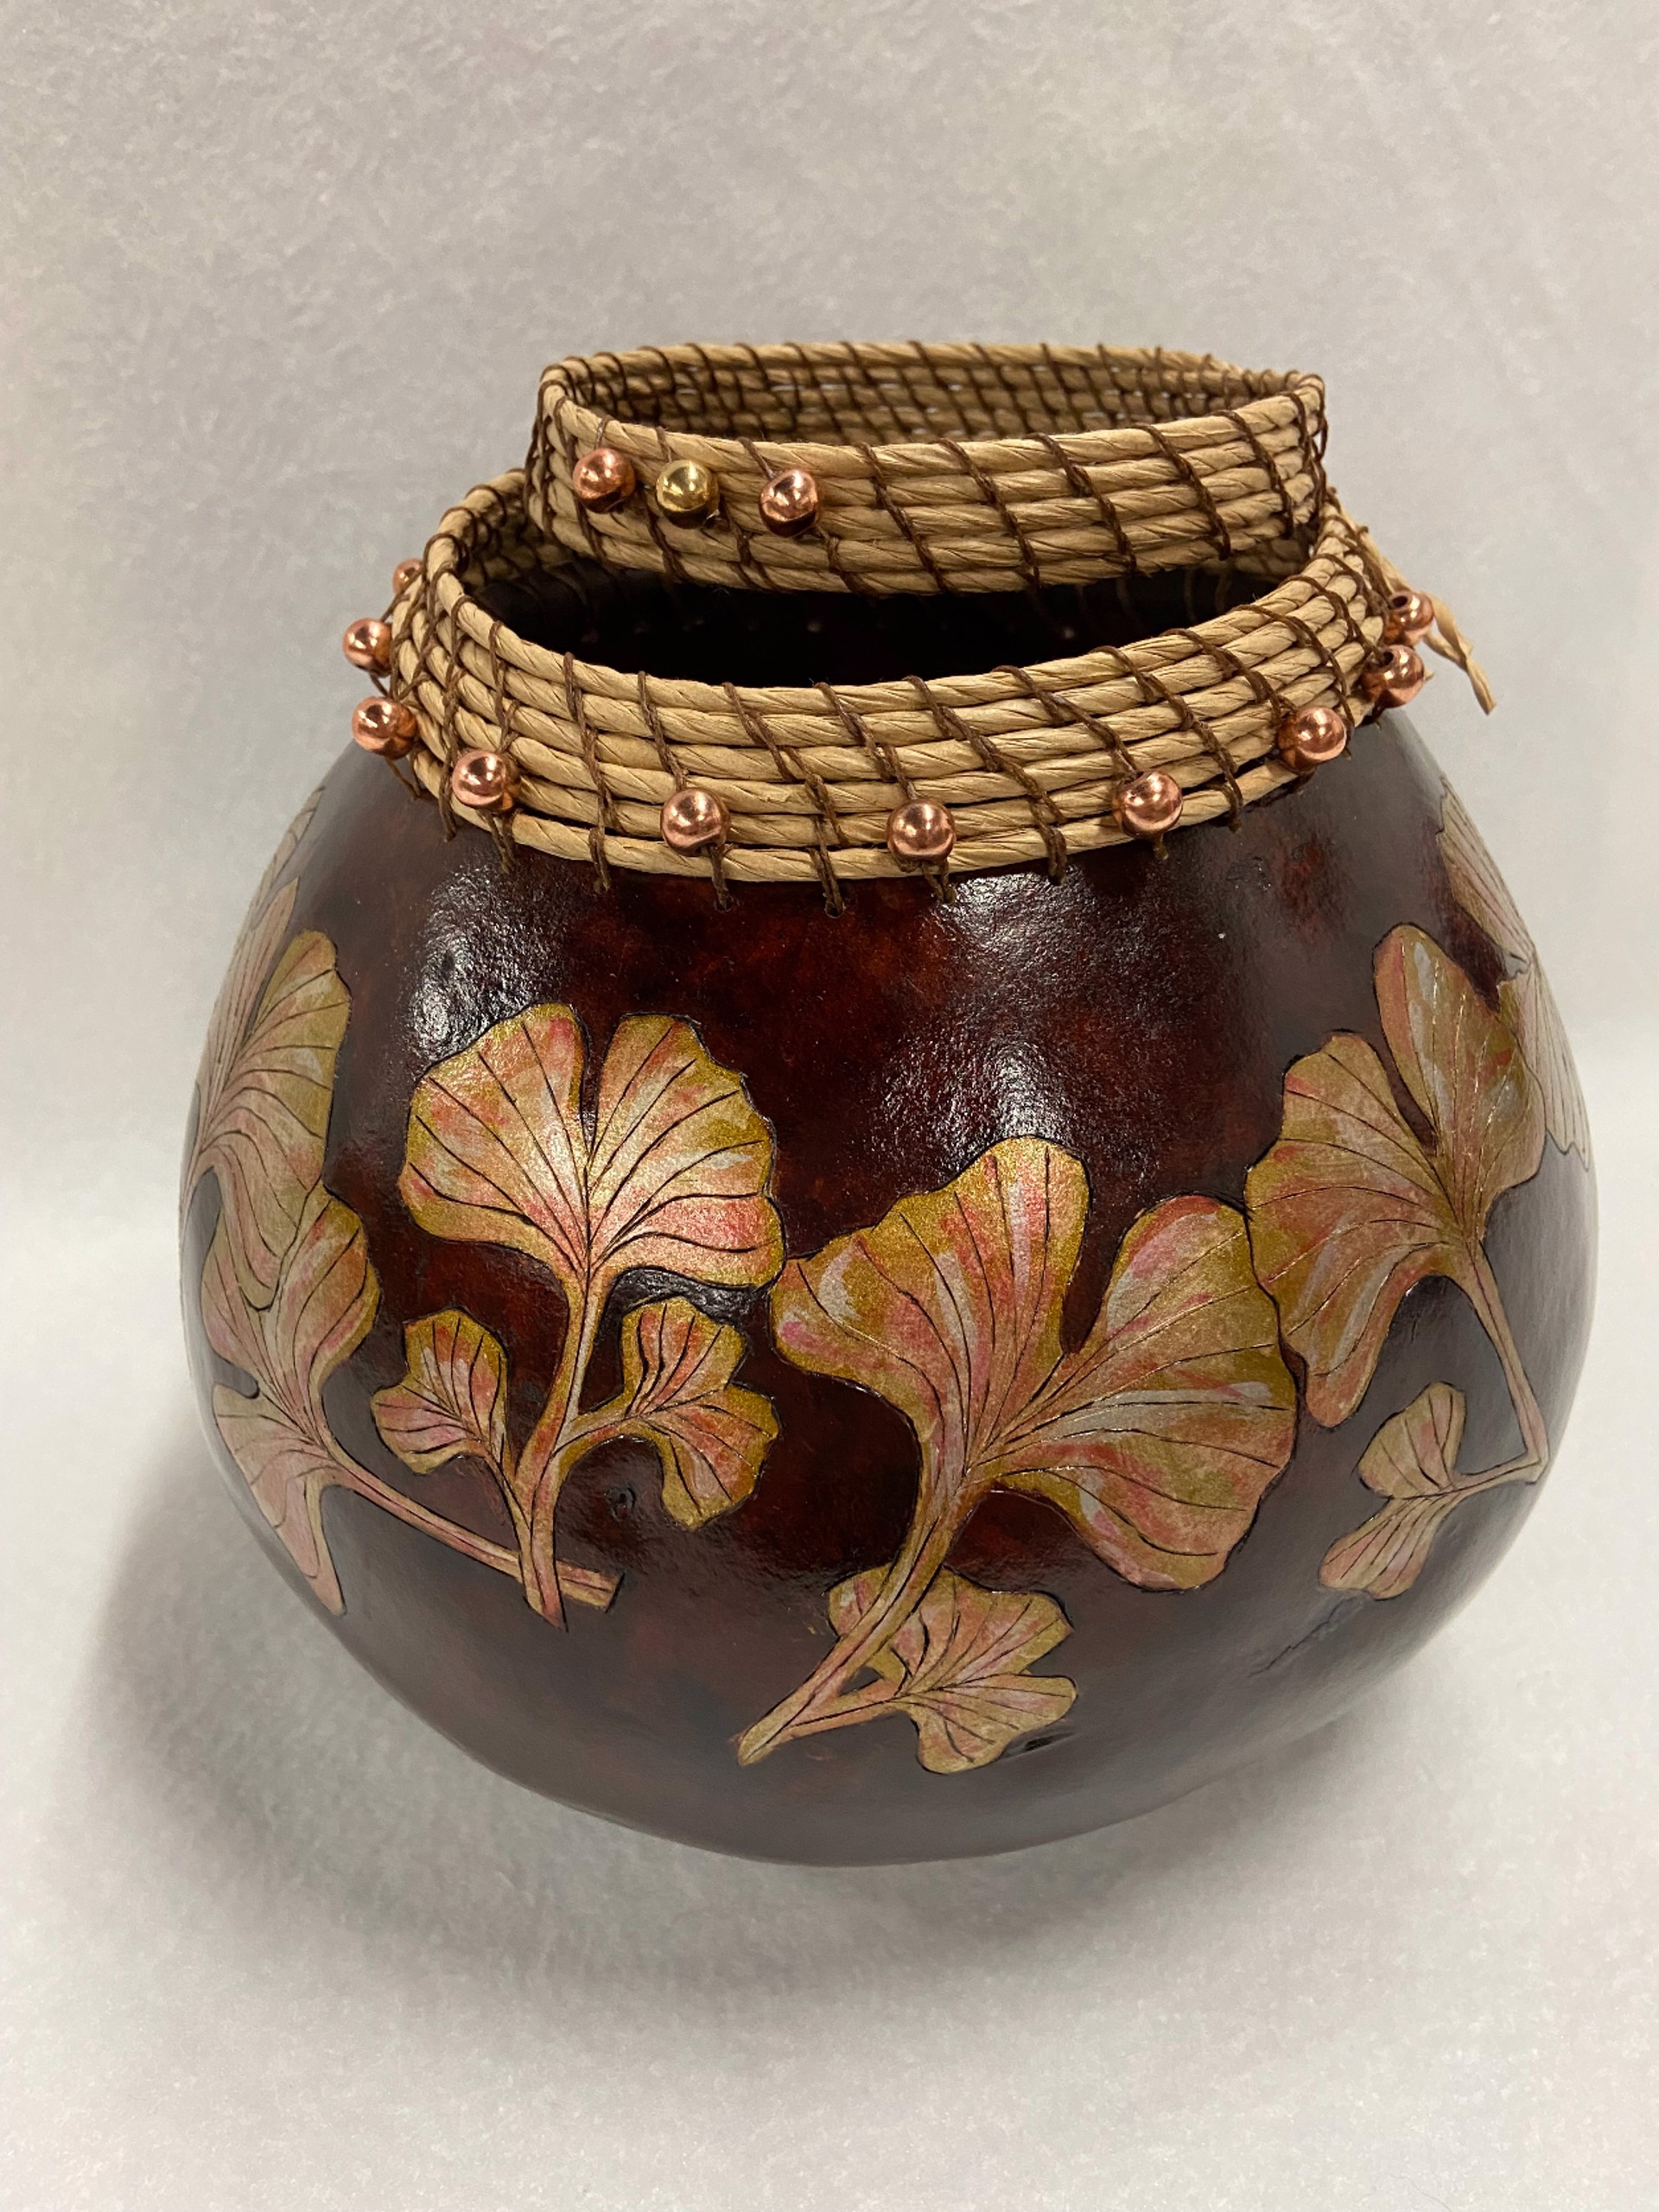 Mahogany and Copper Ginkos by Kate Shoemaker